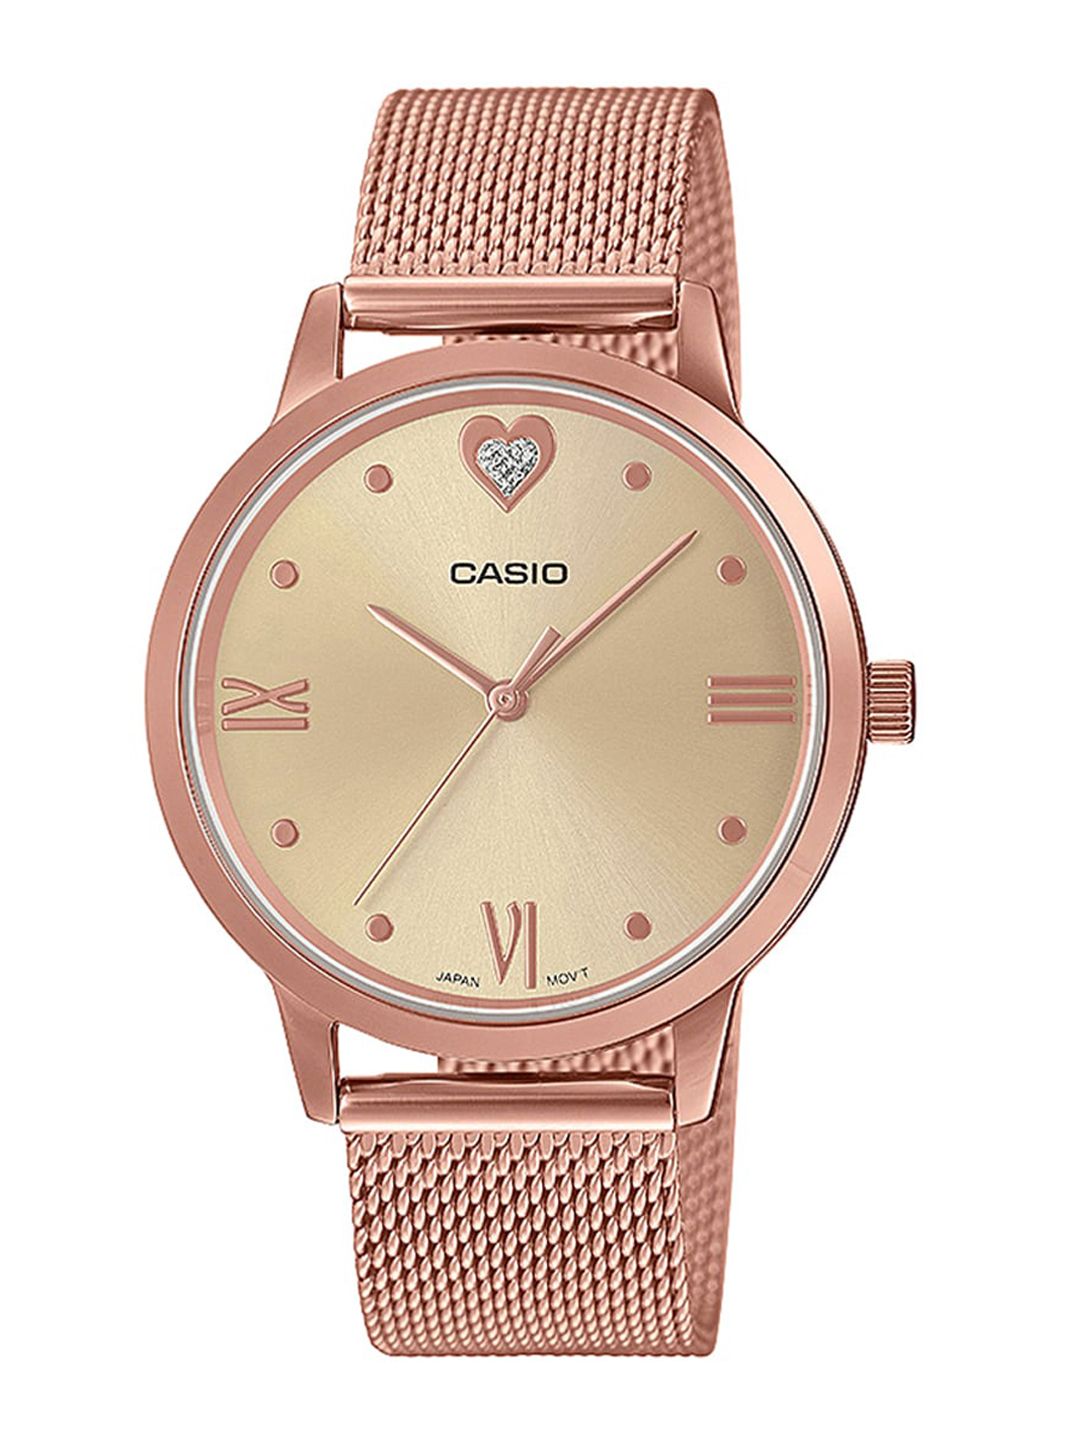 CASIO Women Rose Gold-Toned Embellished Dial & Stainless Steel Bracelet Straps Watch A1995 Price in India